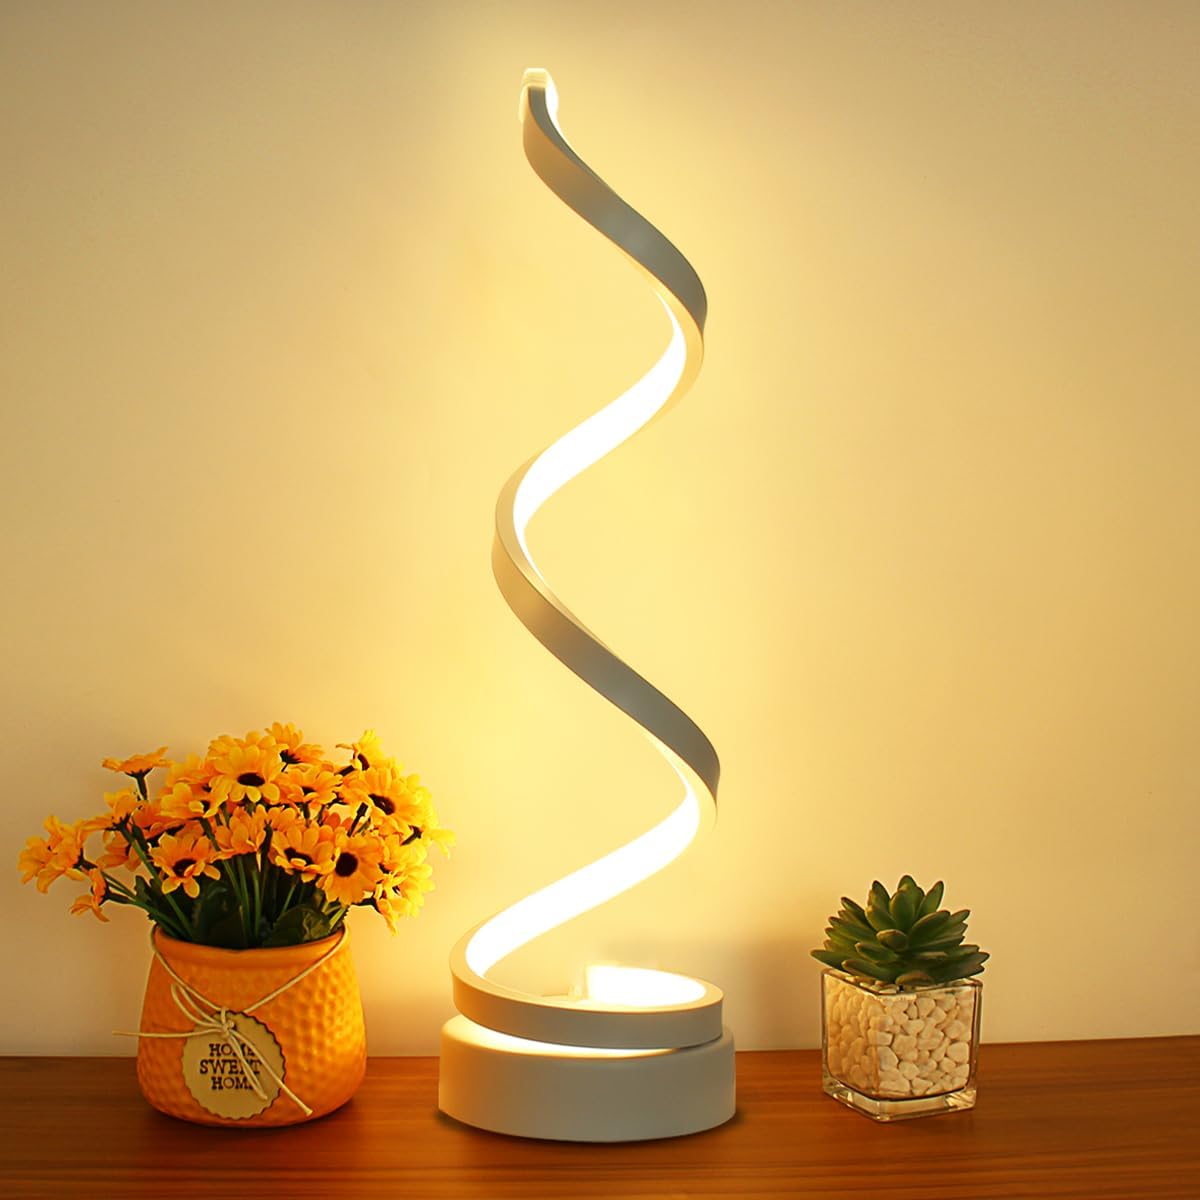 Modern Spiral Table Lamp, Dimmable Table Lamps for Nightstand, 12W LED Desk Lamp for Living Room, 3 Colors 10 Brightness Bedside Lamps Nightstand Lamp Desk Light for Bedroom, Office - White